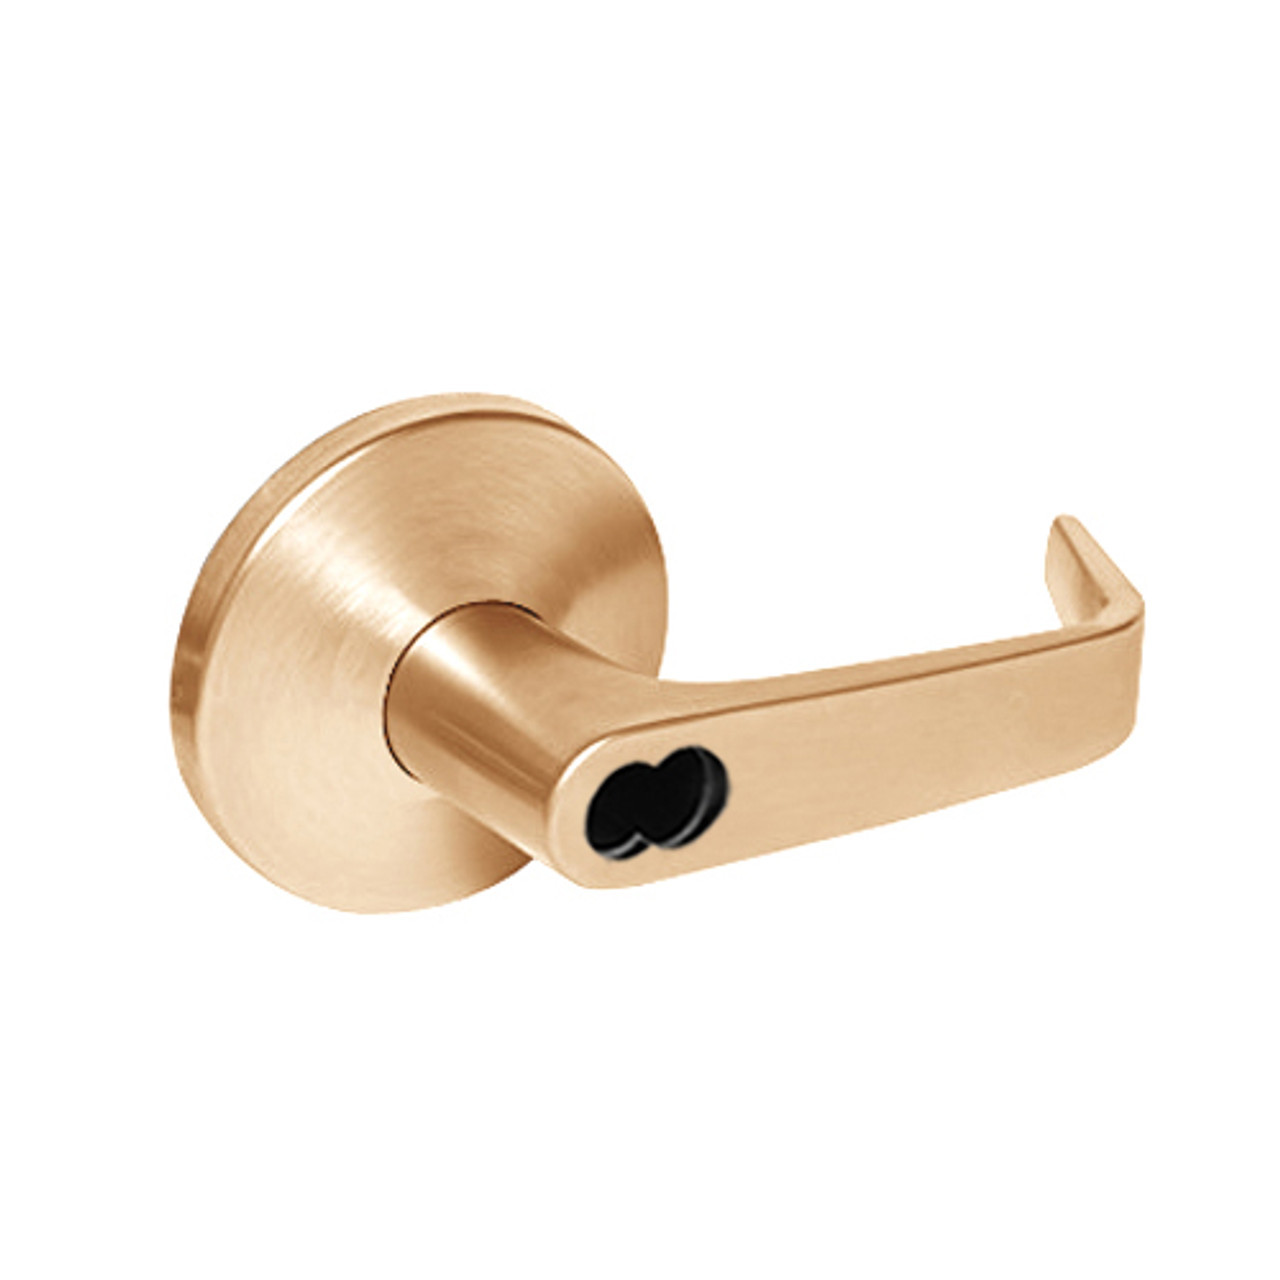 9K37DR15LS3611LM Best 9K Series Special Function Cylindrical Lever Locks with Contour Angle with Return Lever Design Accept 7 Pin Best Core in Bright Bronze